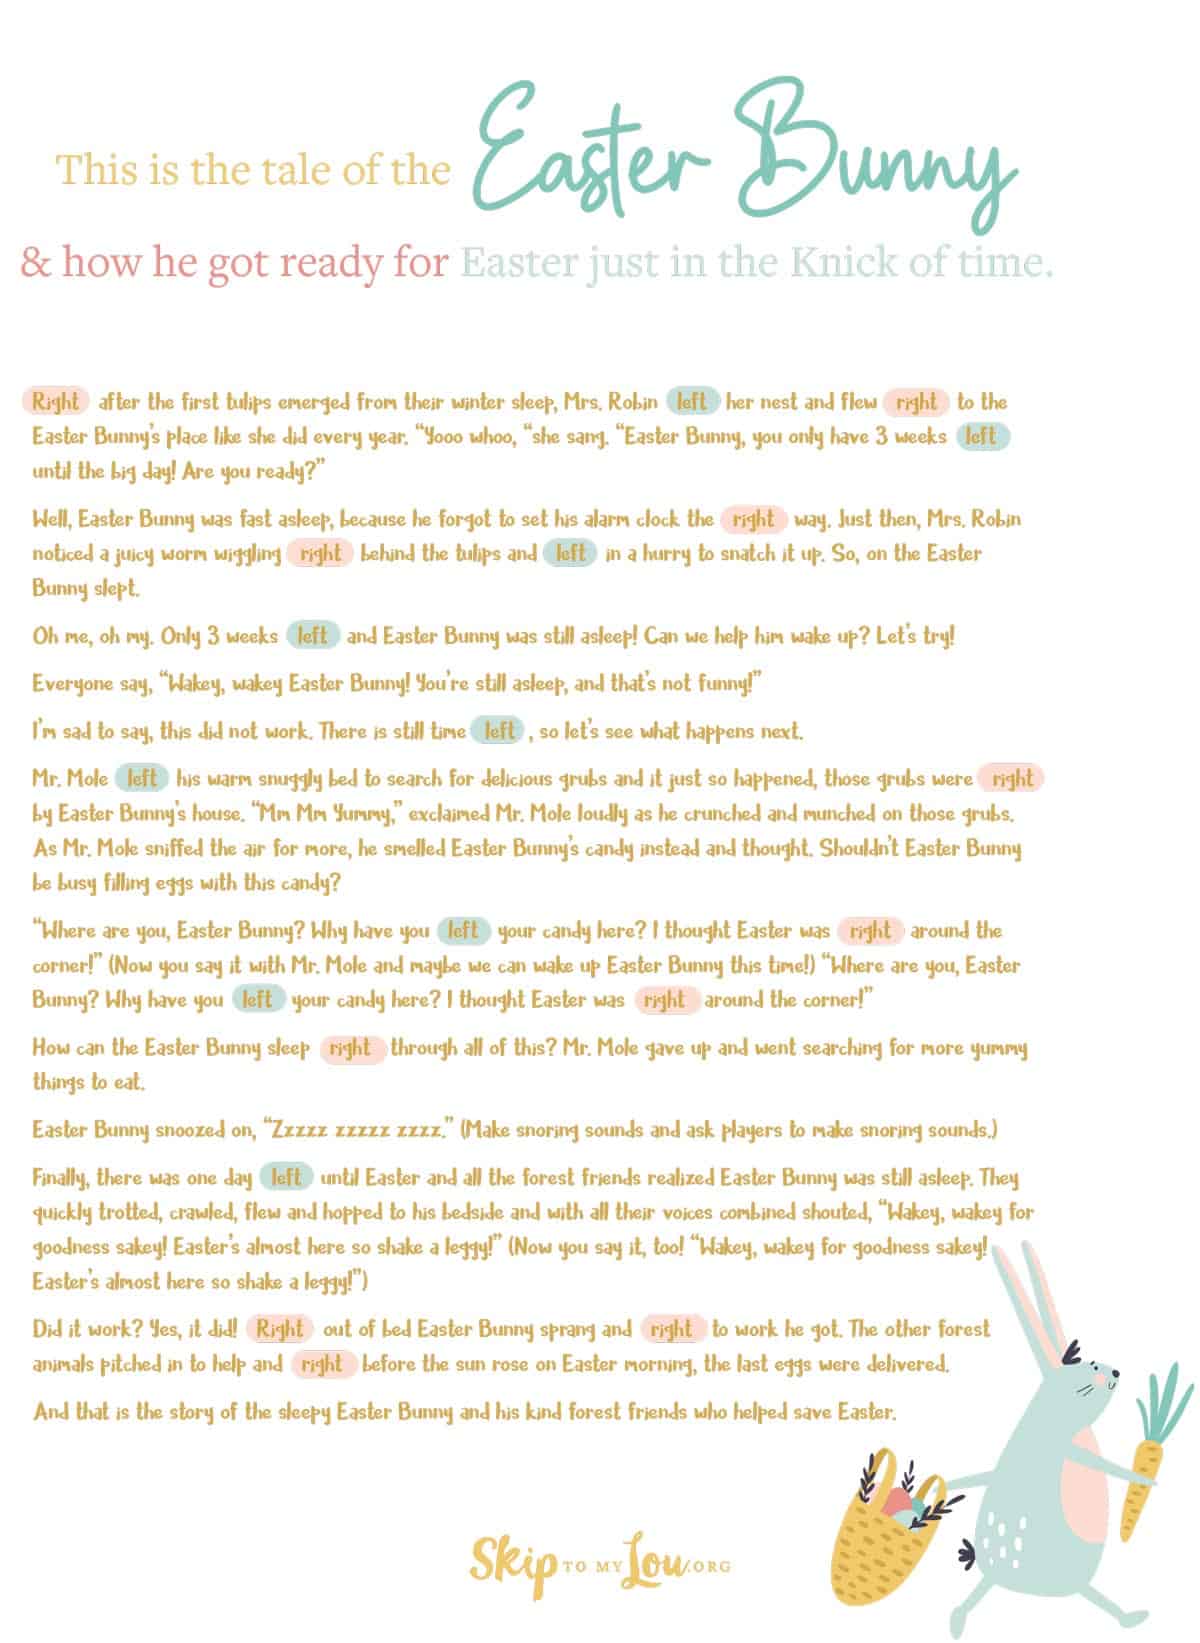 The tale of the Easter Bunny getting ready for Easter and the forest animal friends who tried to wake him as he overslept, by Skip to my Lou.